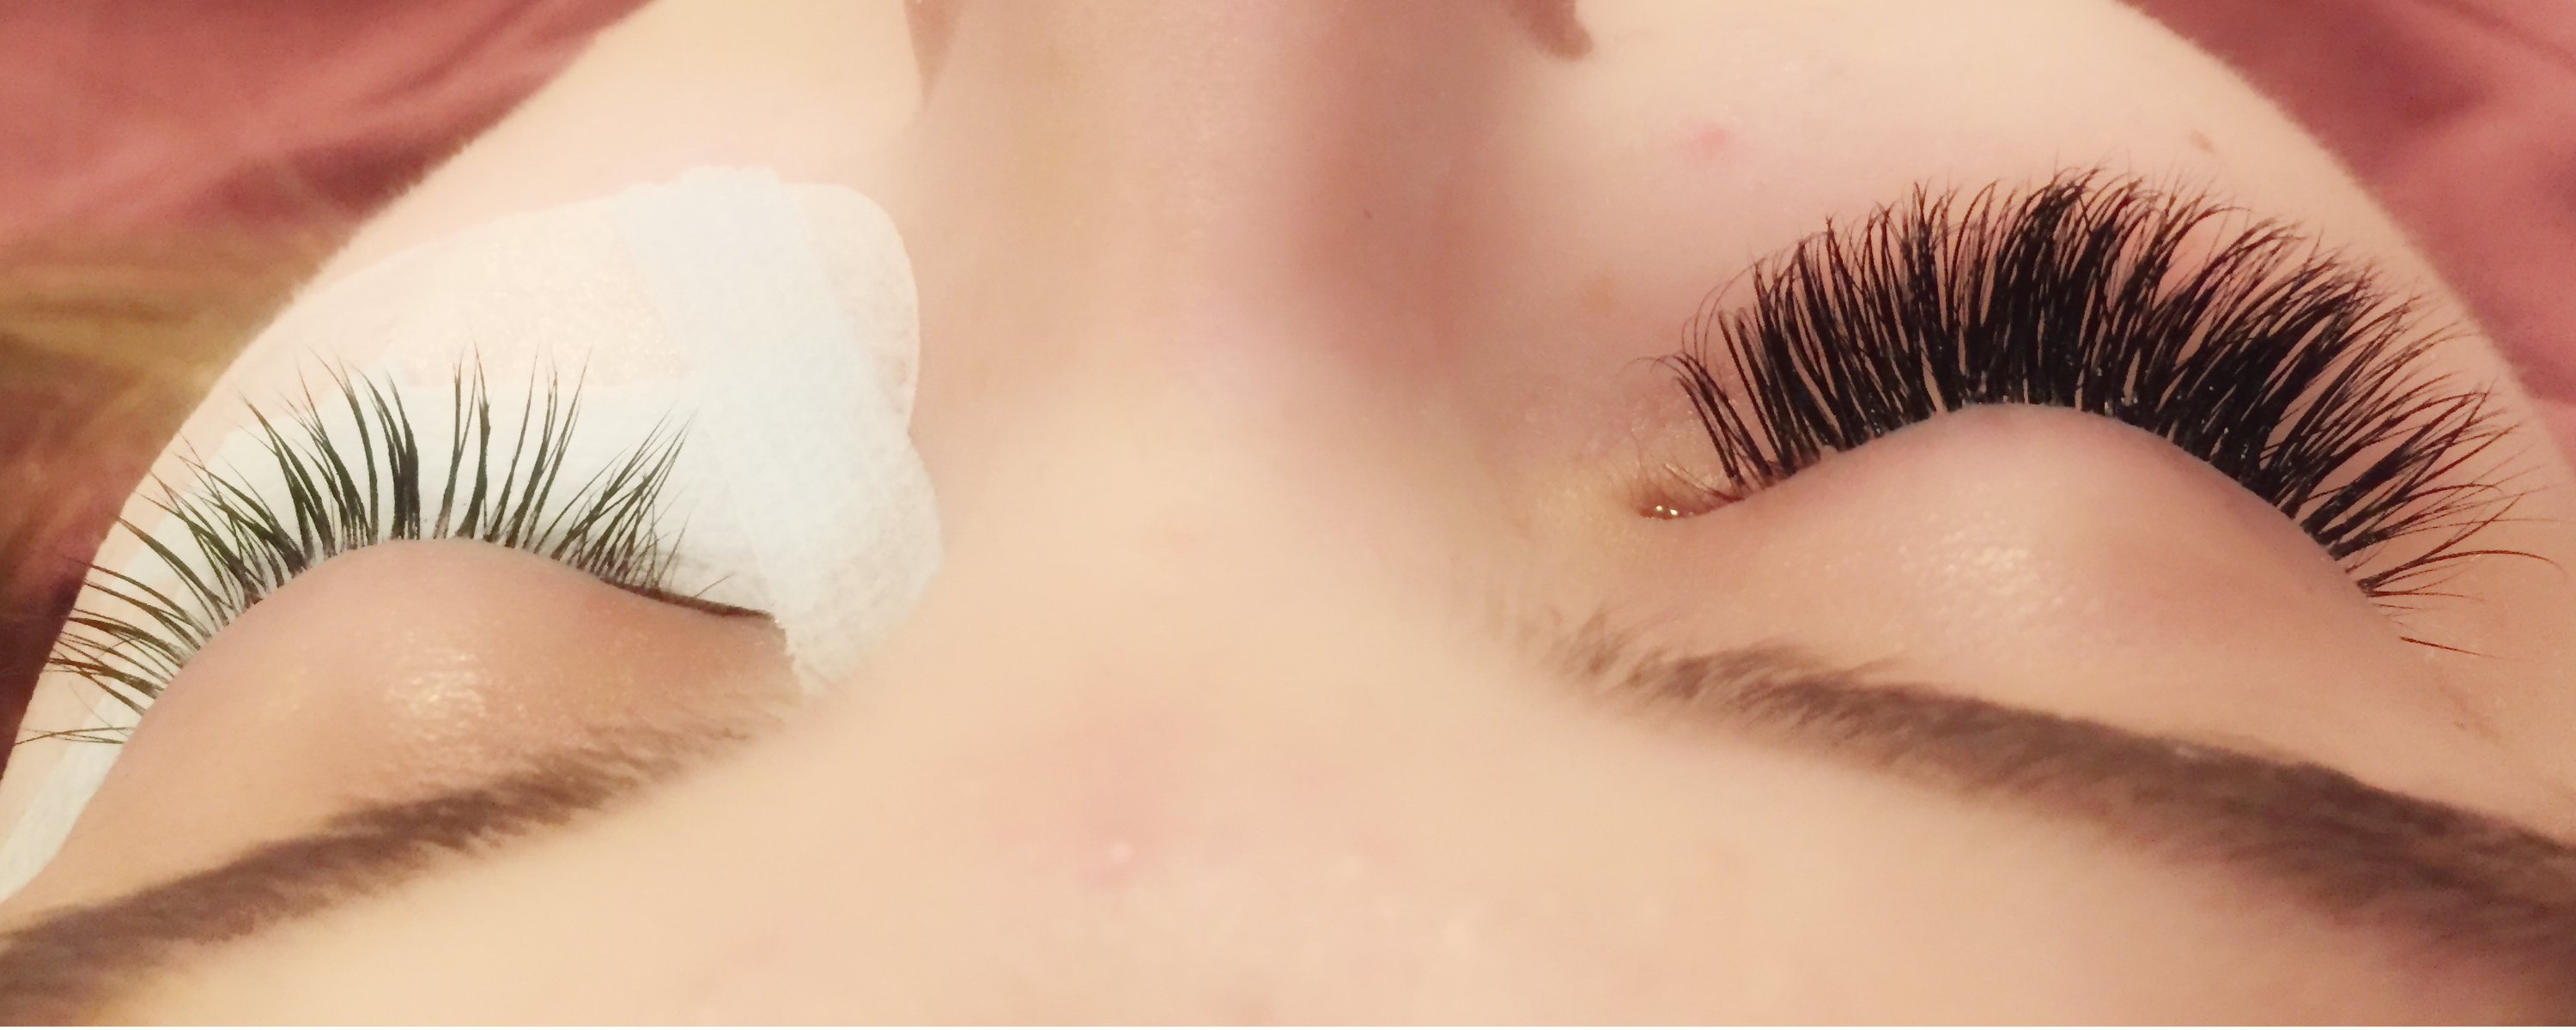 Eyelashes Before and After